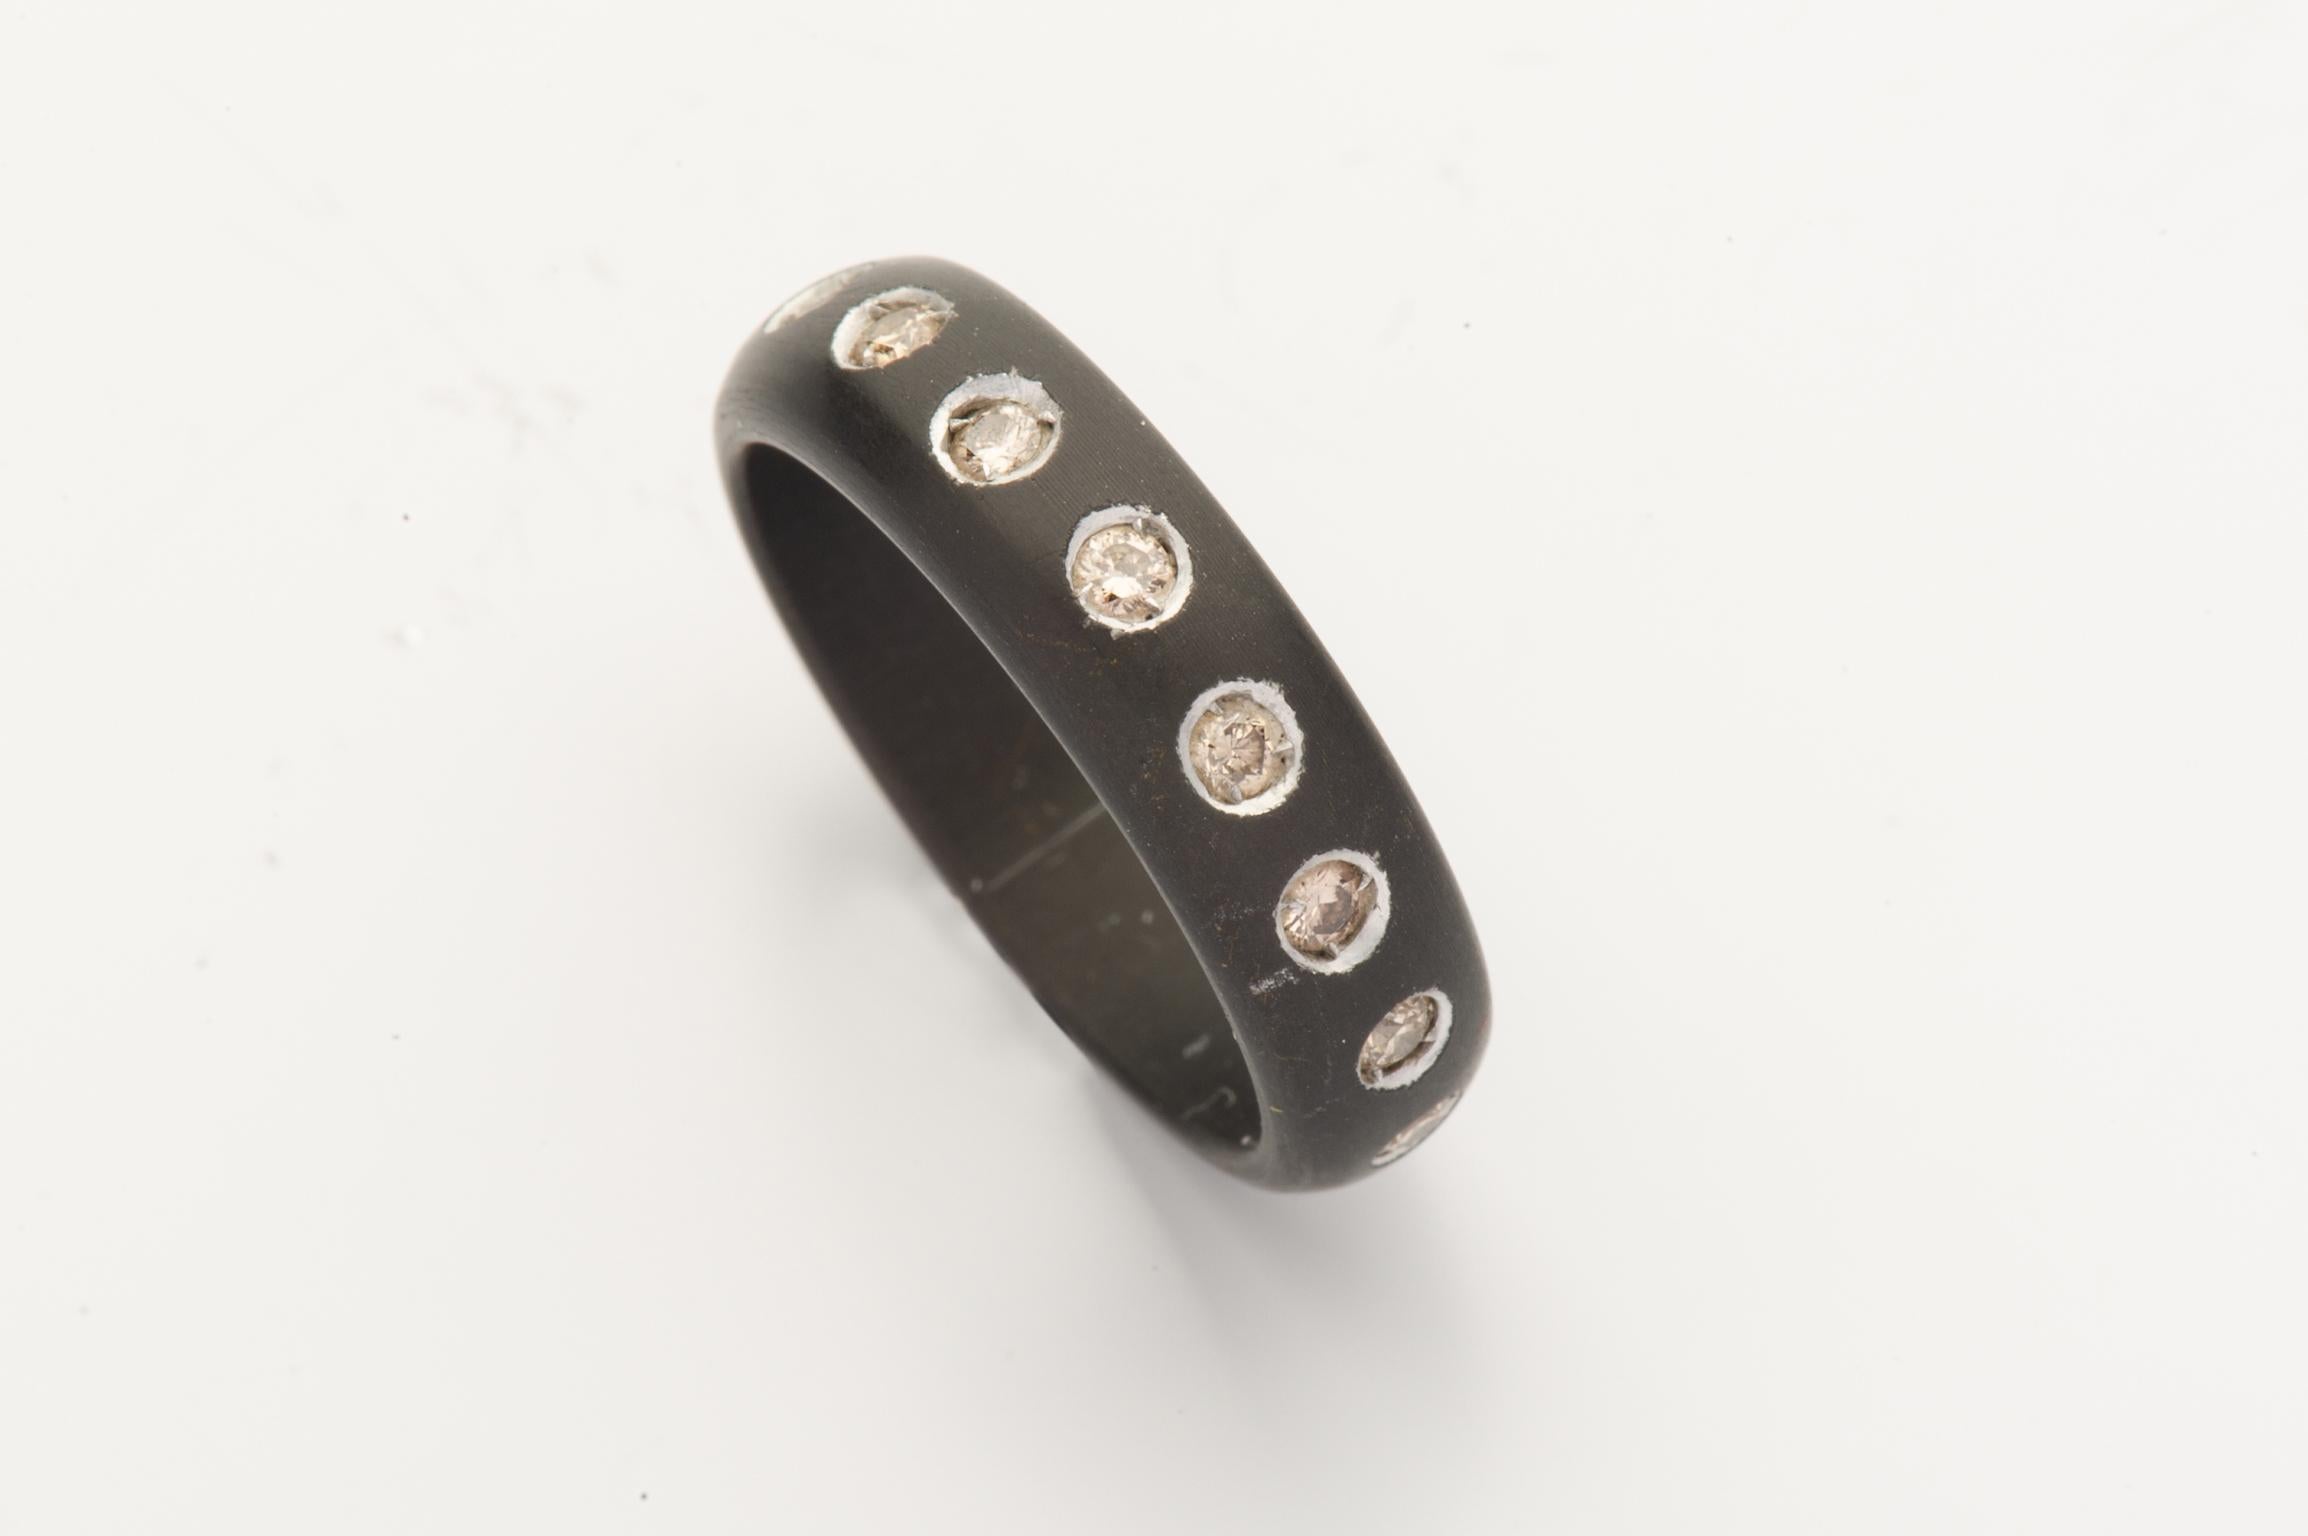 Unusual young ring in argal and anticorodal, that's aluminum and antimony with little brilliants: devised and made in the famous town of Valenza (Piemonte), famous all over the world, by a young artisan some years ago.
The number of brilliants are